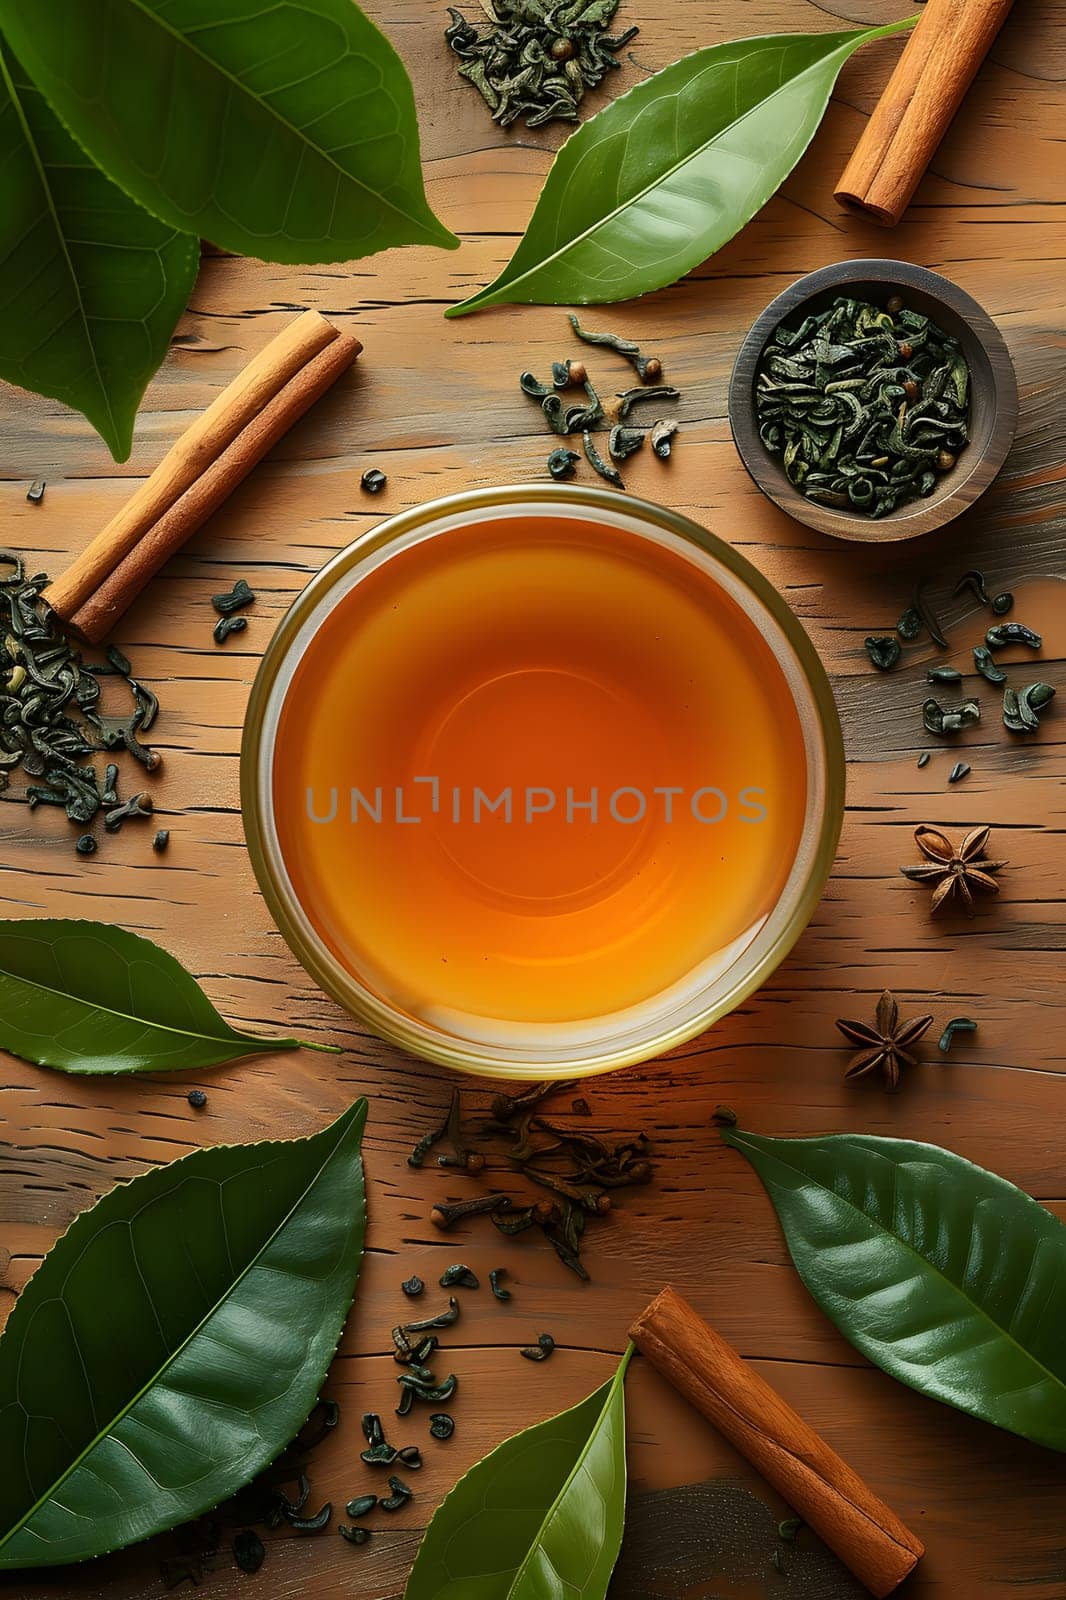 A cup sits on a wooden table surrounded by green tea leaves and cinnamon sticks, creating a cozy and aromatic setting with elements of nature and kitchen utensils